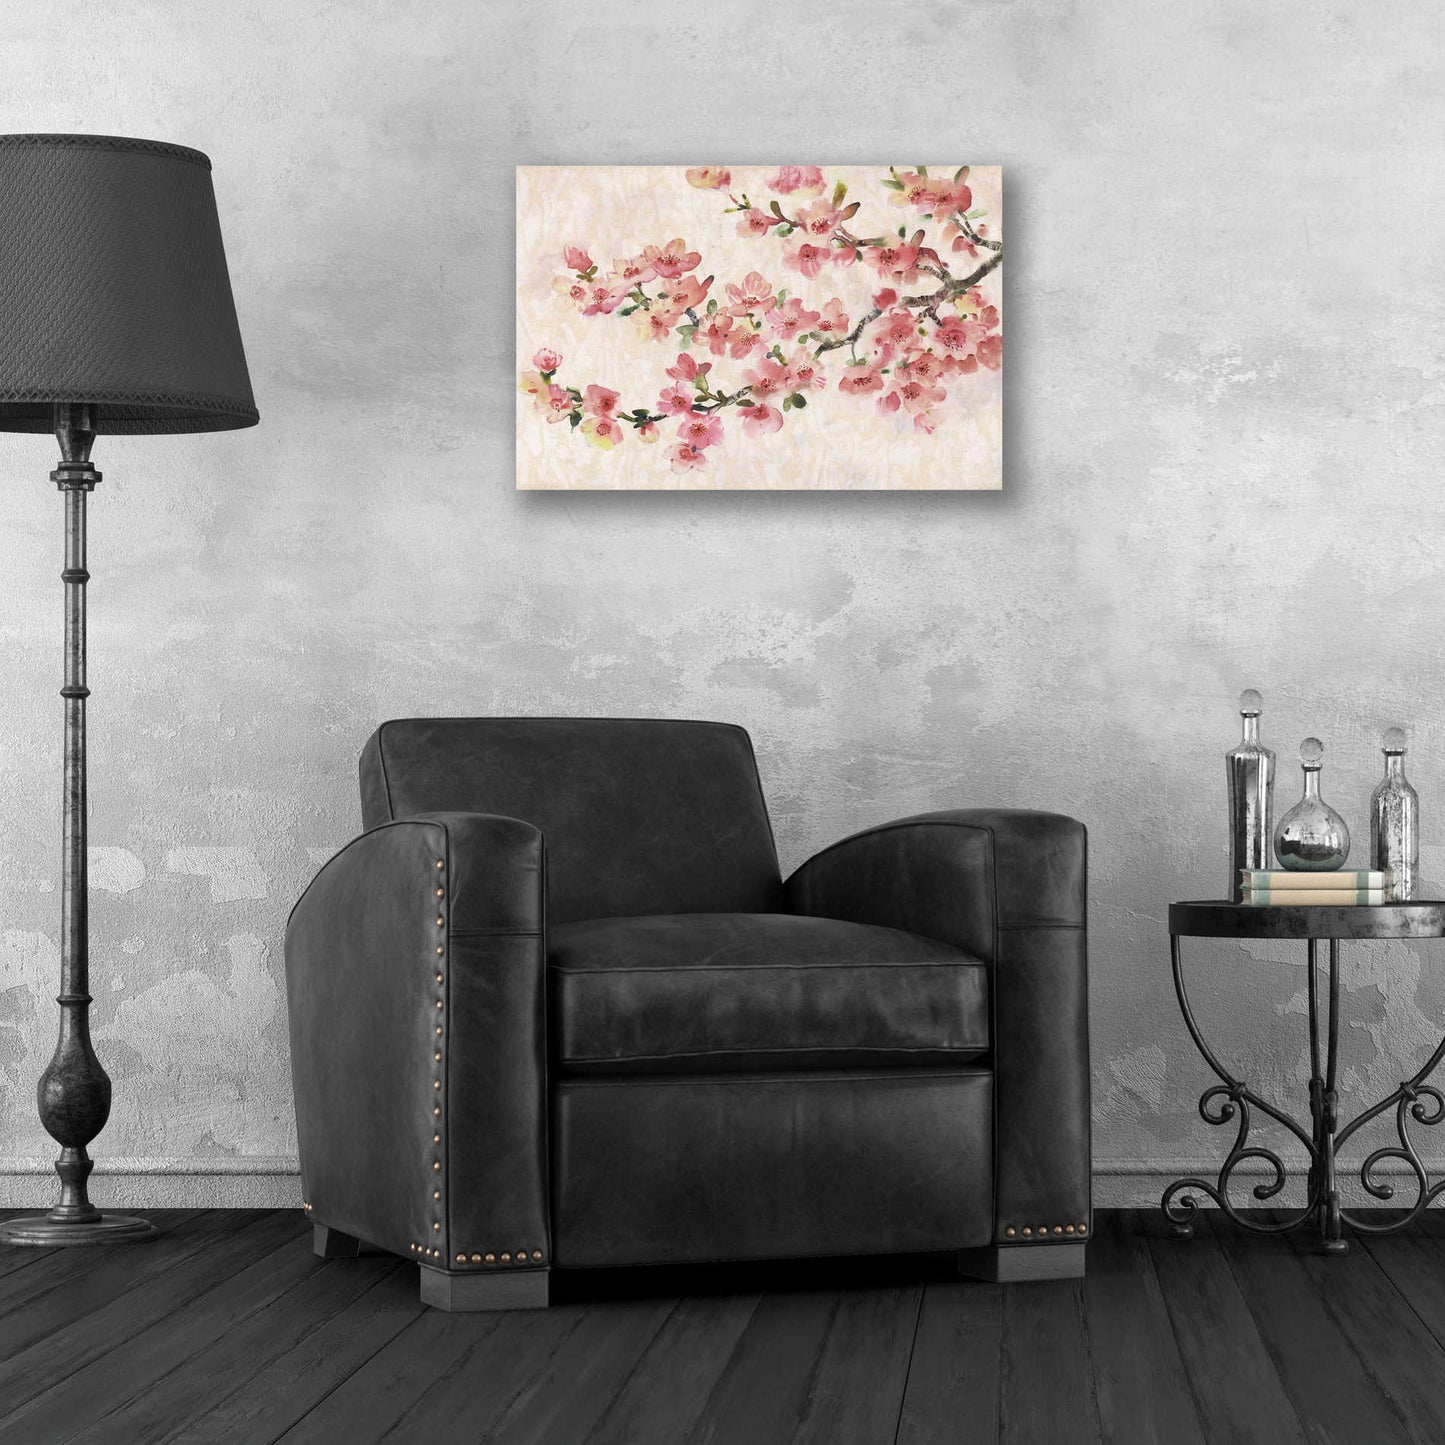 Epic Art 'Cherry Blossom Composition I' by Tim O'Toole, Acrylic Glass Wall Art,24x16